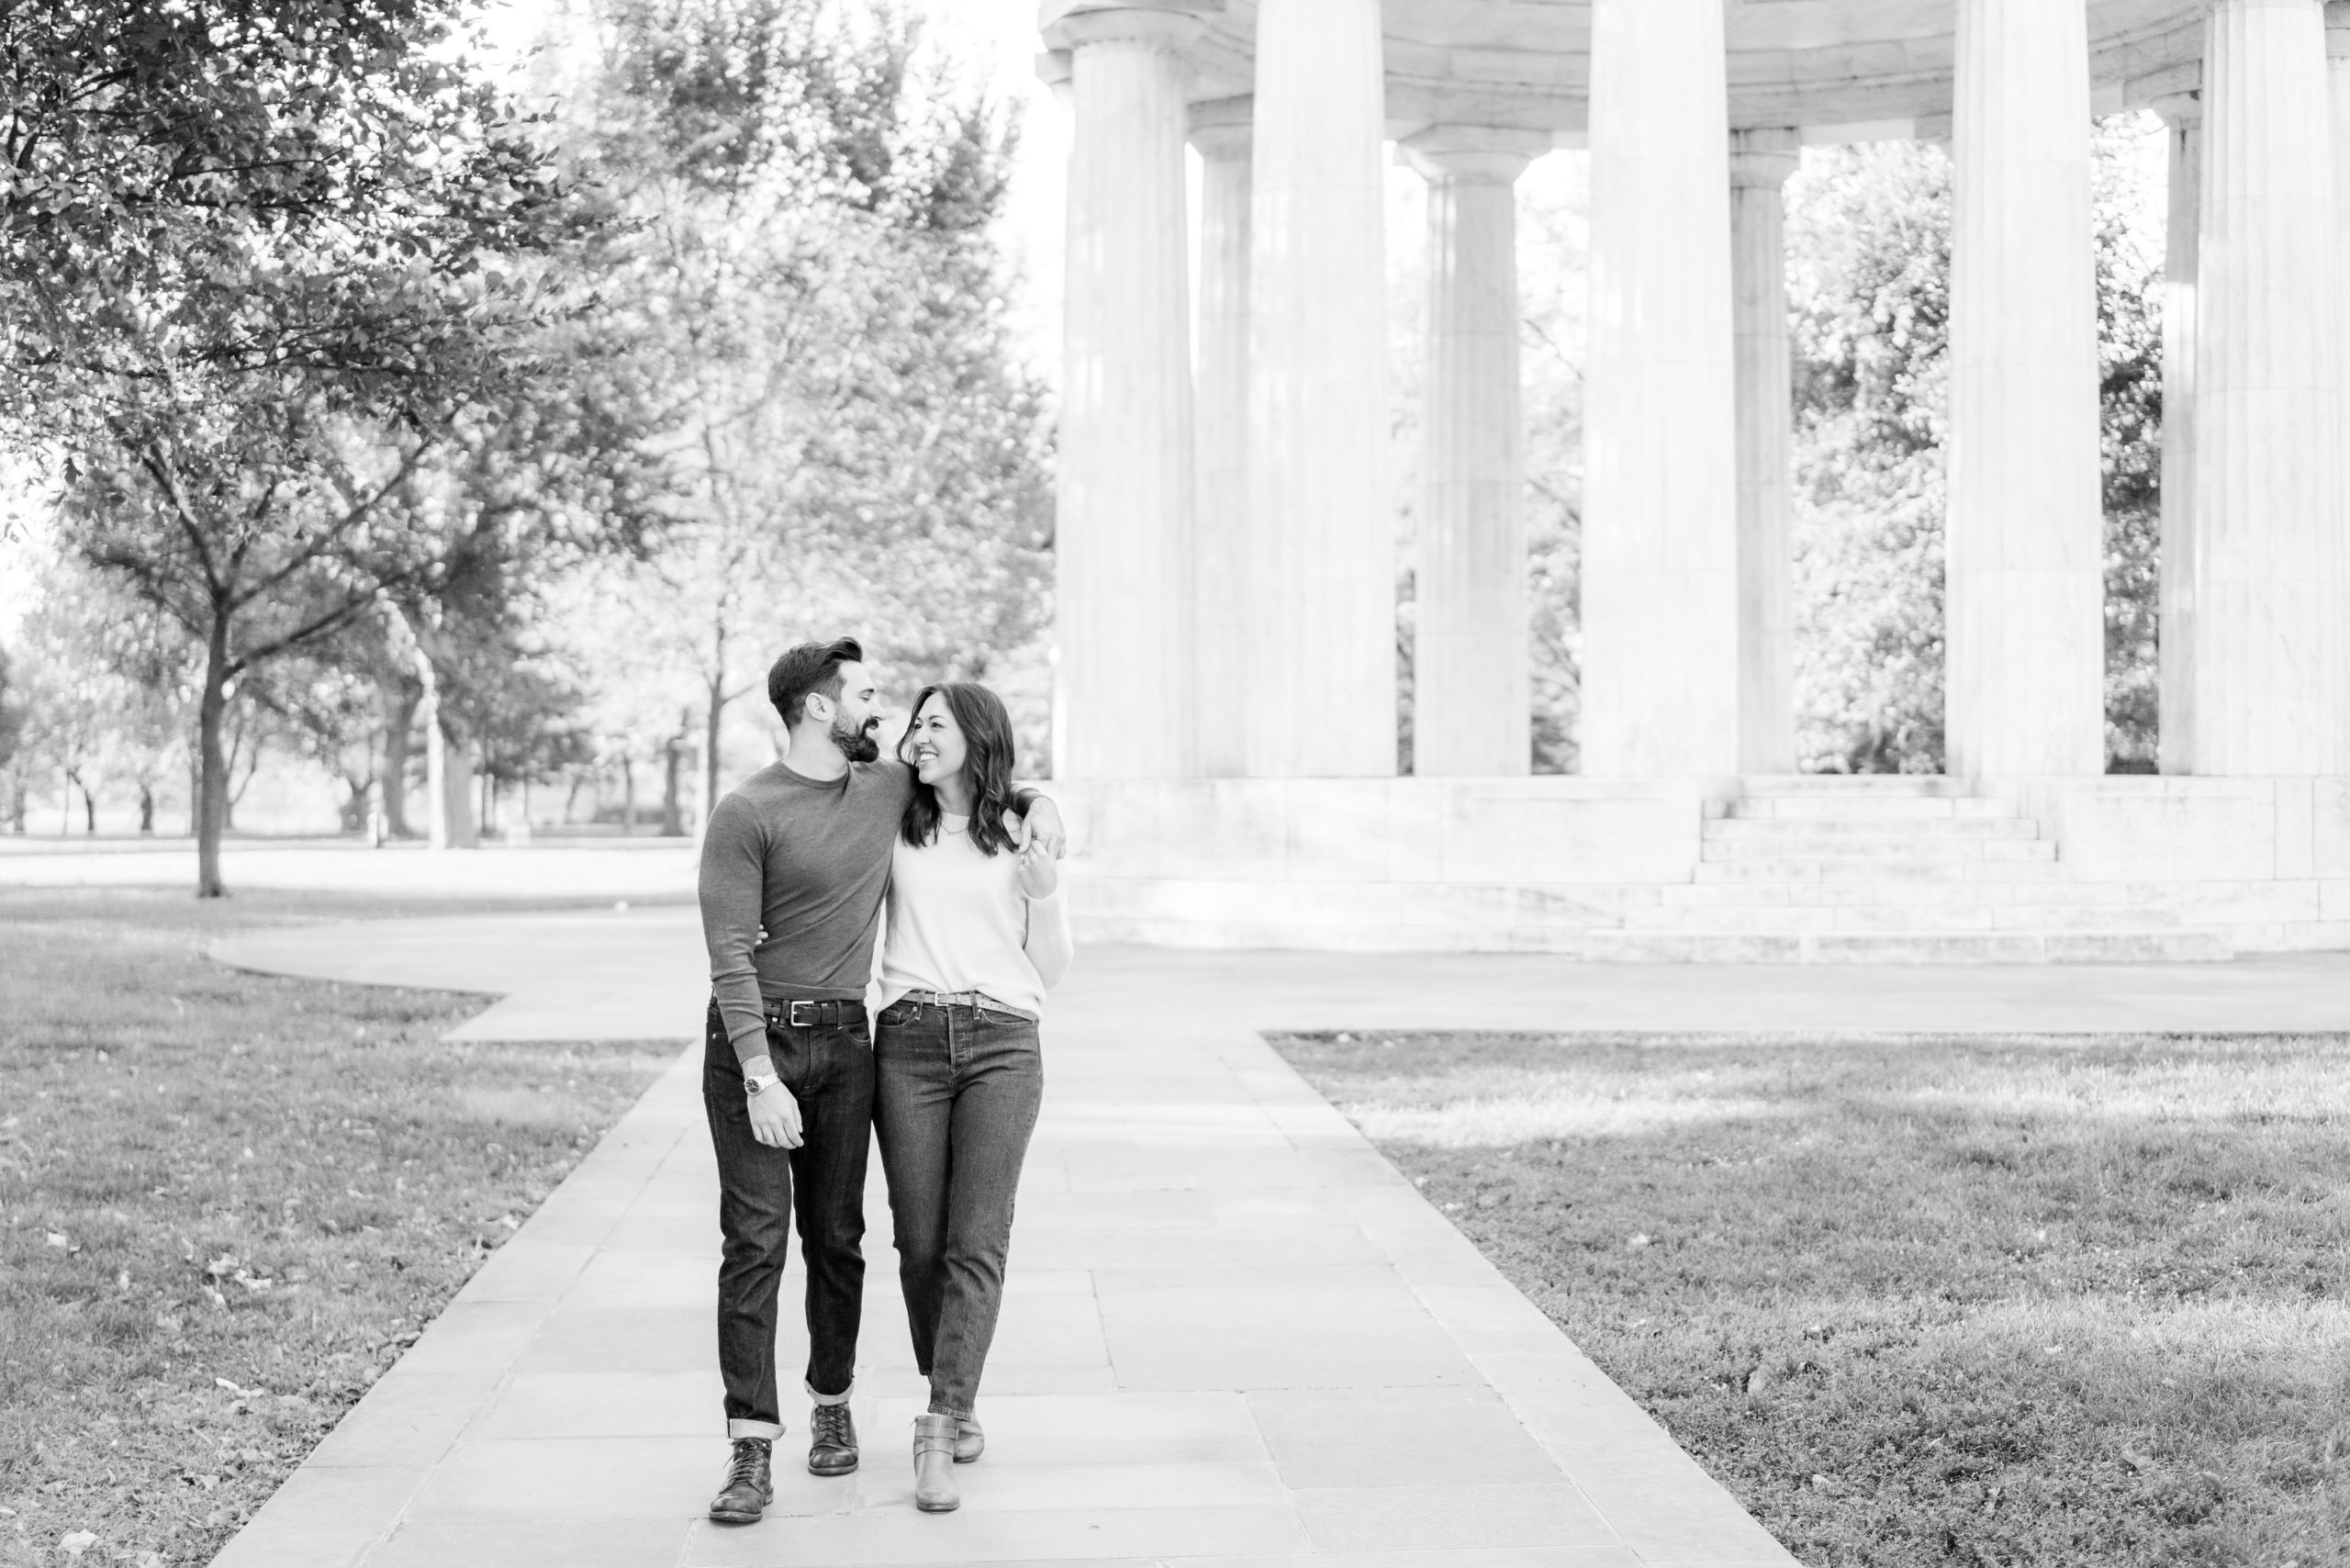 An elegant sunrise engagement session at the Reflecting Pool & Lincoln Memorial by Washington, DC wedding photographer, Alicia Lacey.